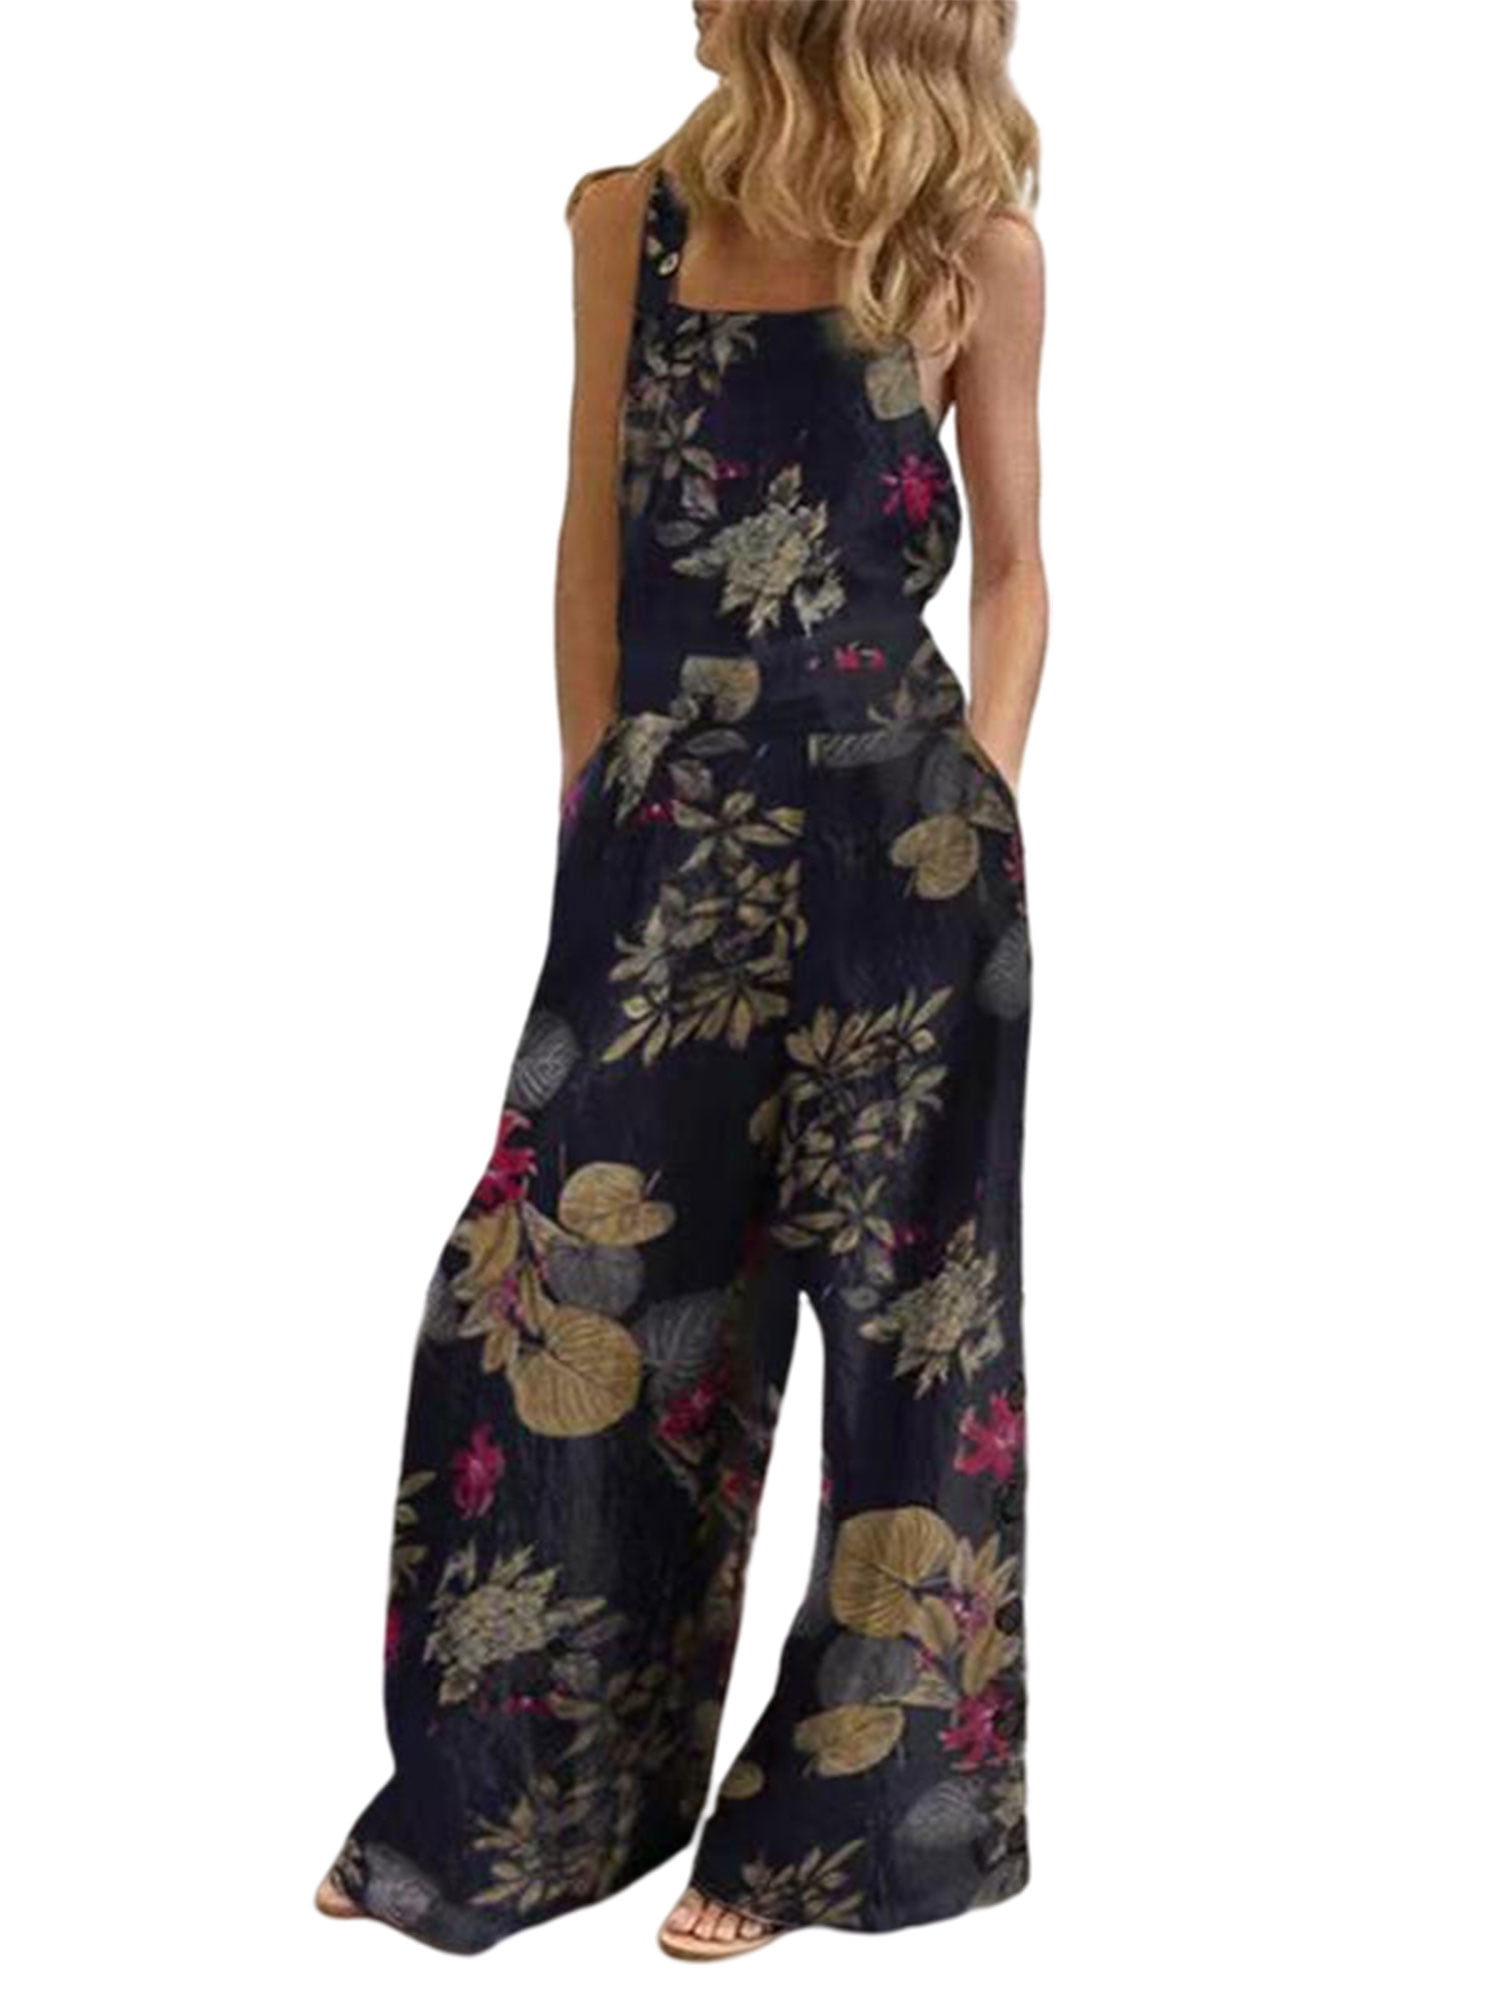 Plaid Jumpsuit for Women Summer Casual Loose Floral Overalls Baggy Long ...